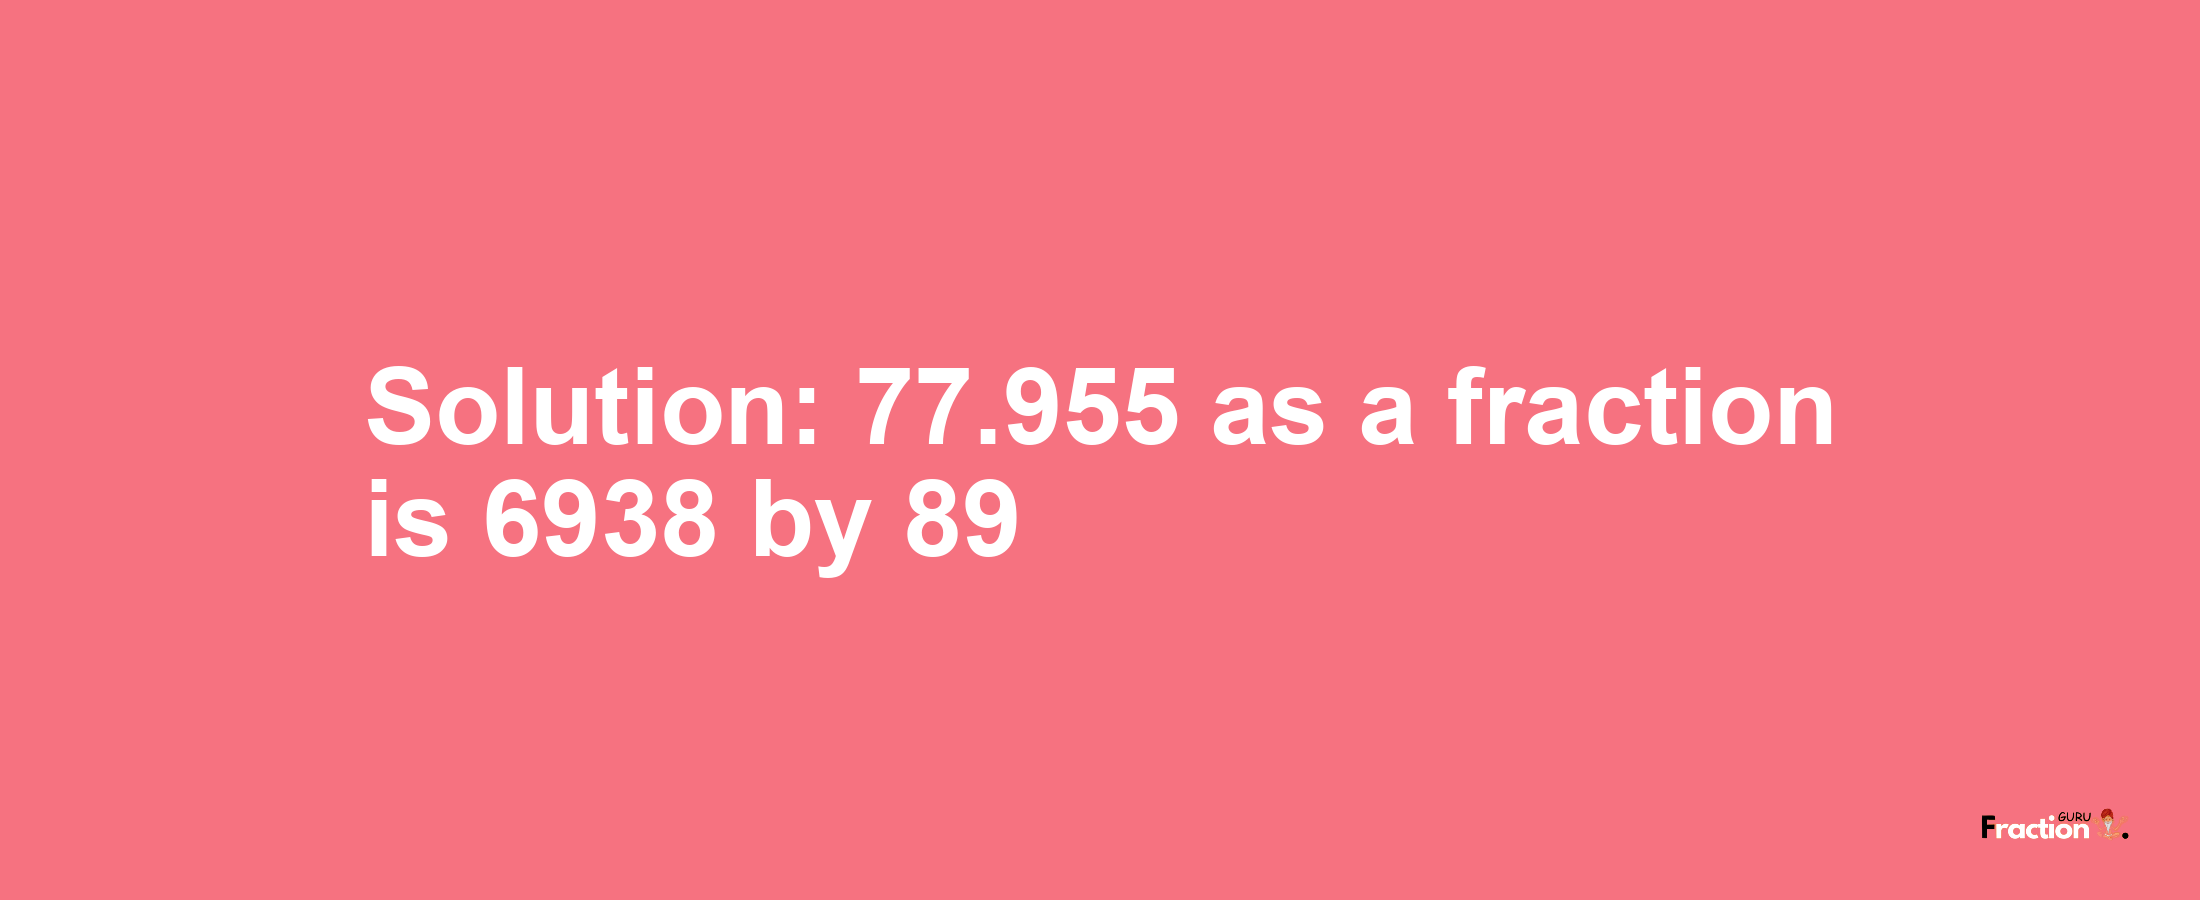 Solution:77.955 as a fraction is 6938/89